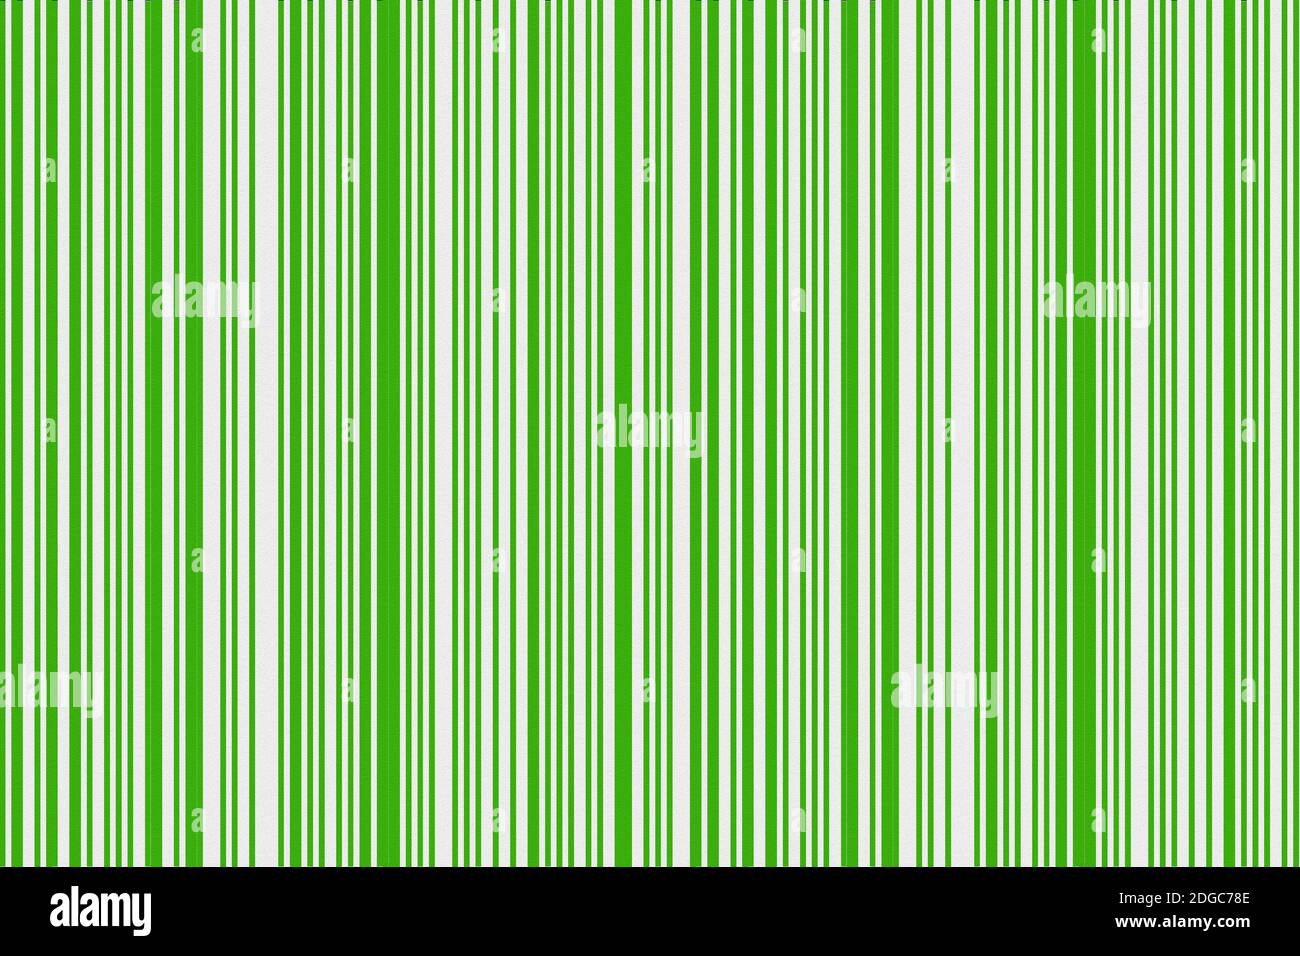 Abstract geometric background green lines texture bar code base Stock Photo